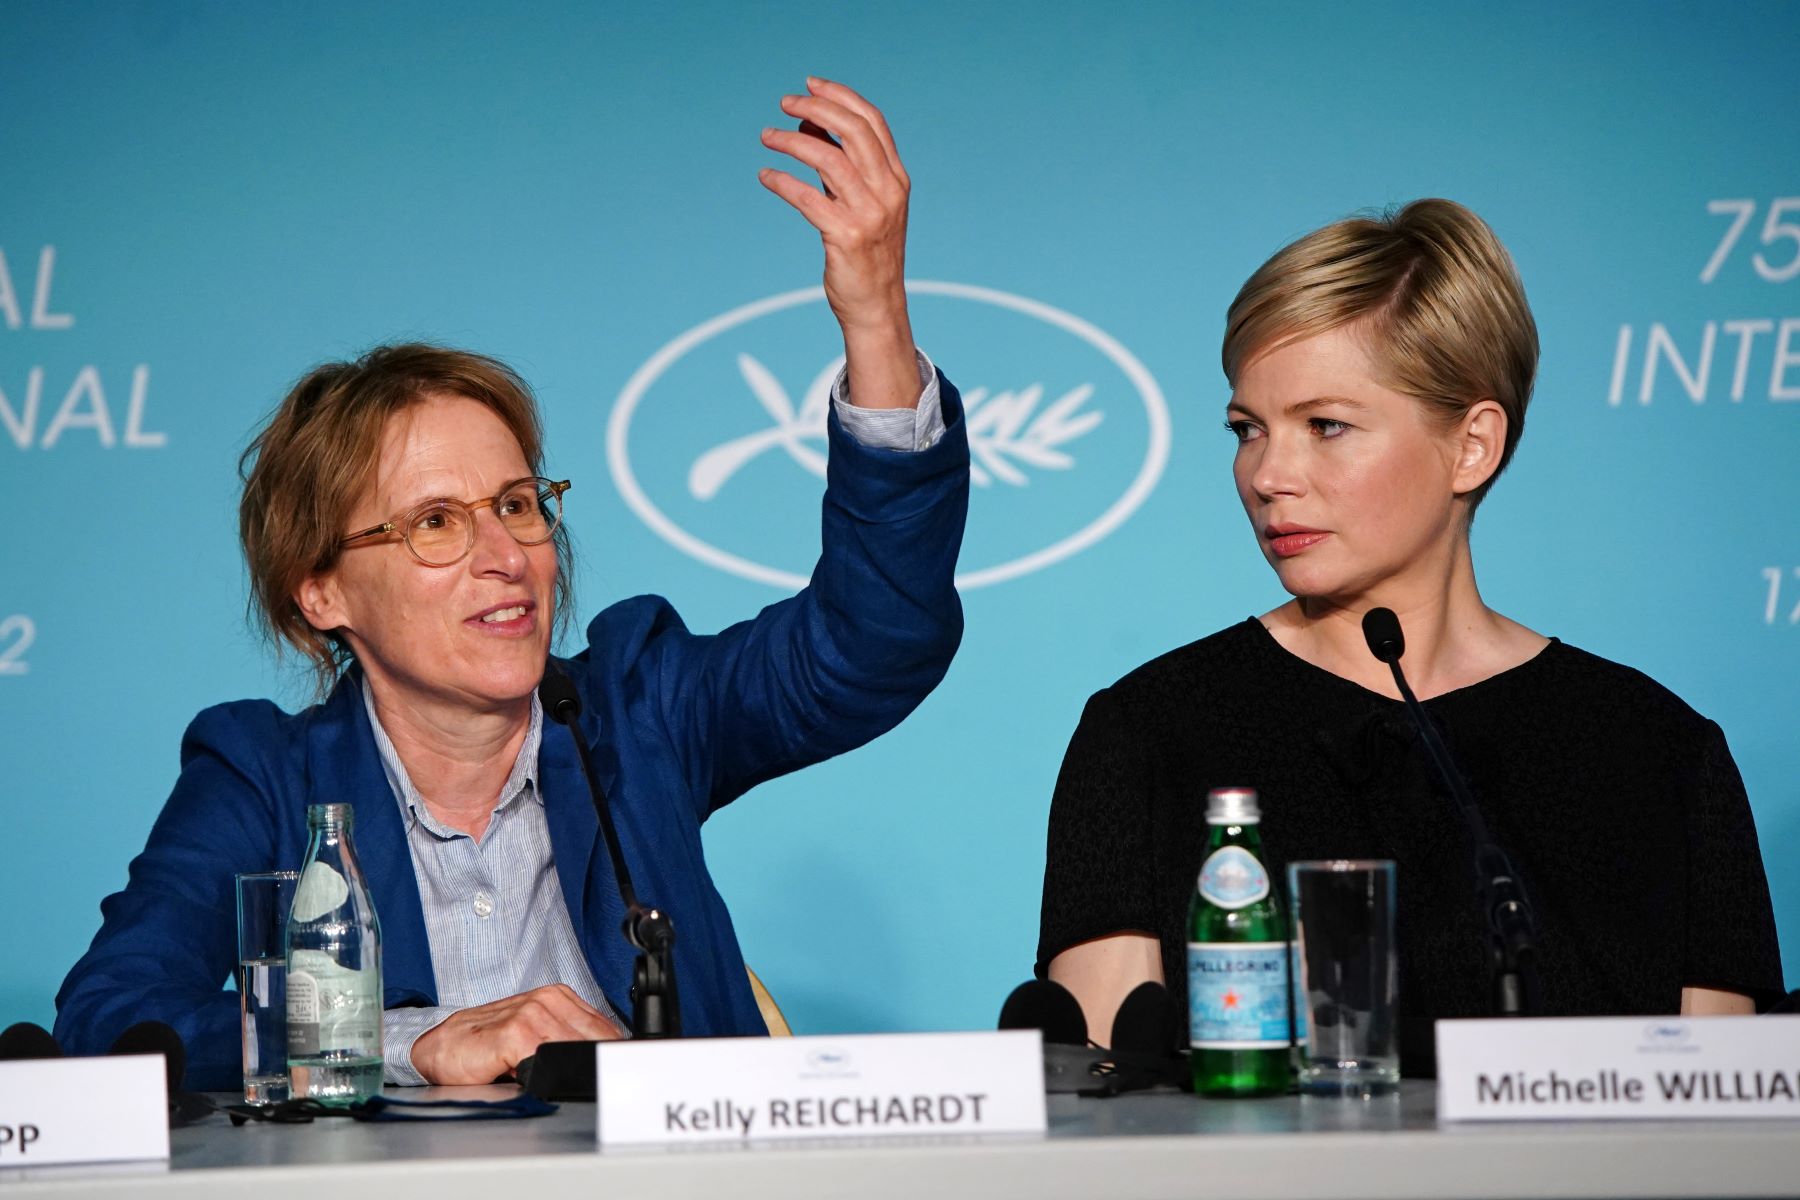 Kelly Reichardt and Michelle Williams at a press conference for 'Showing Up' in Cannes, France